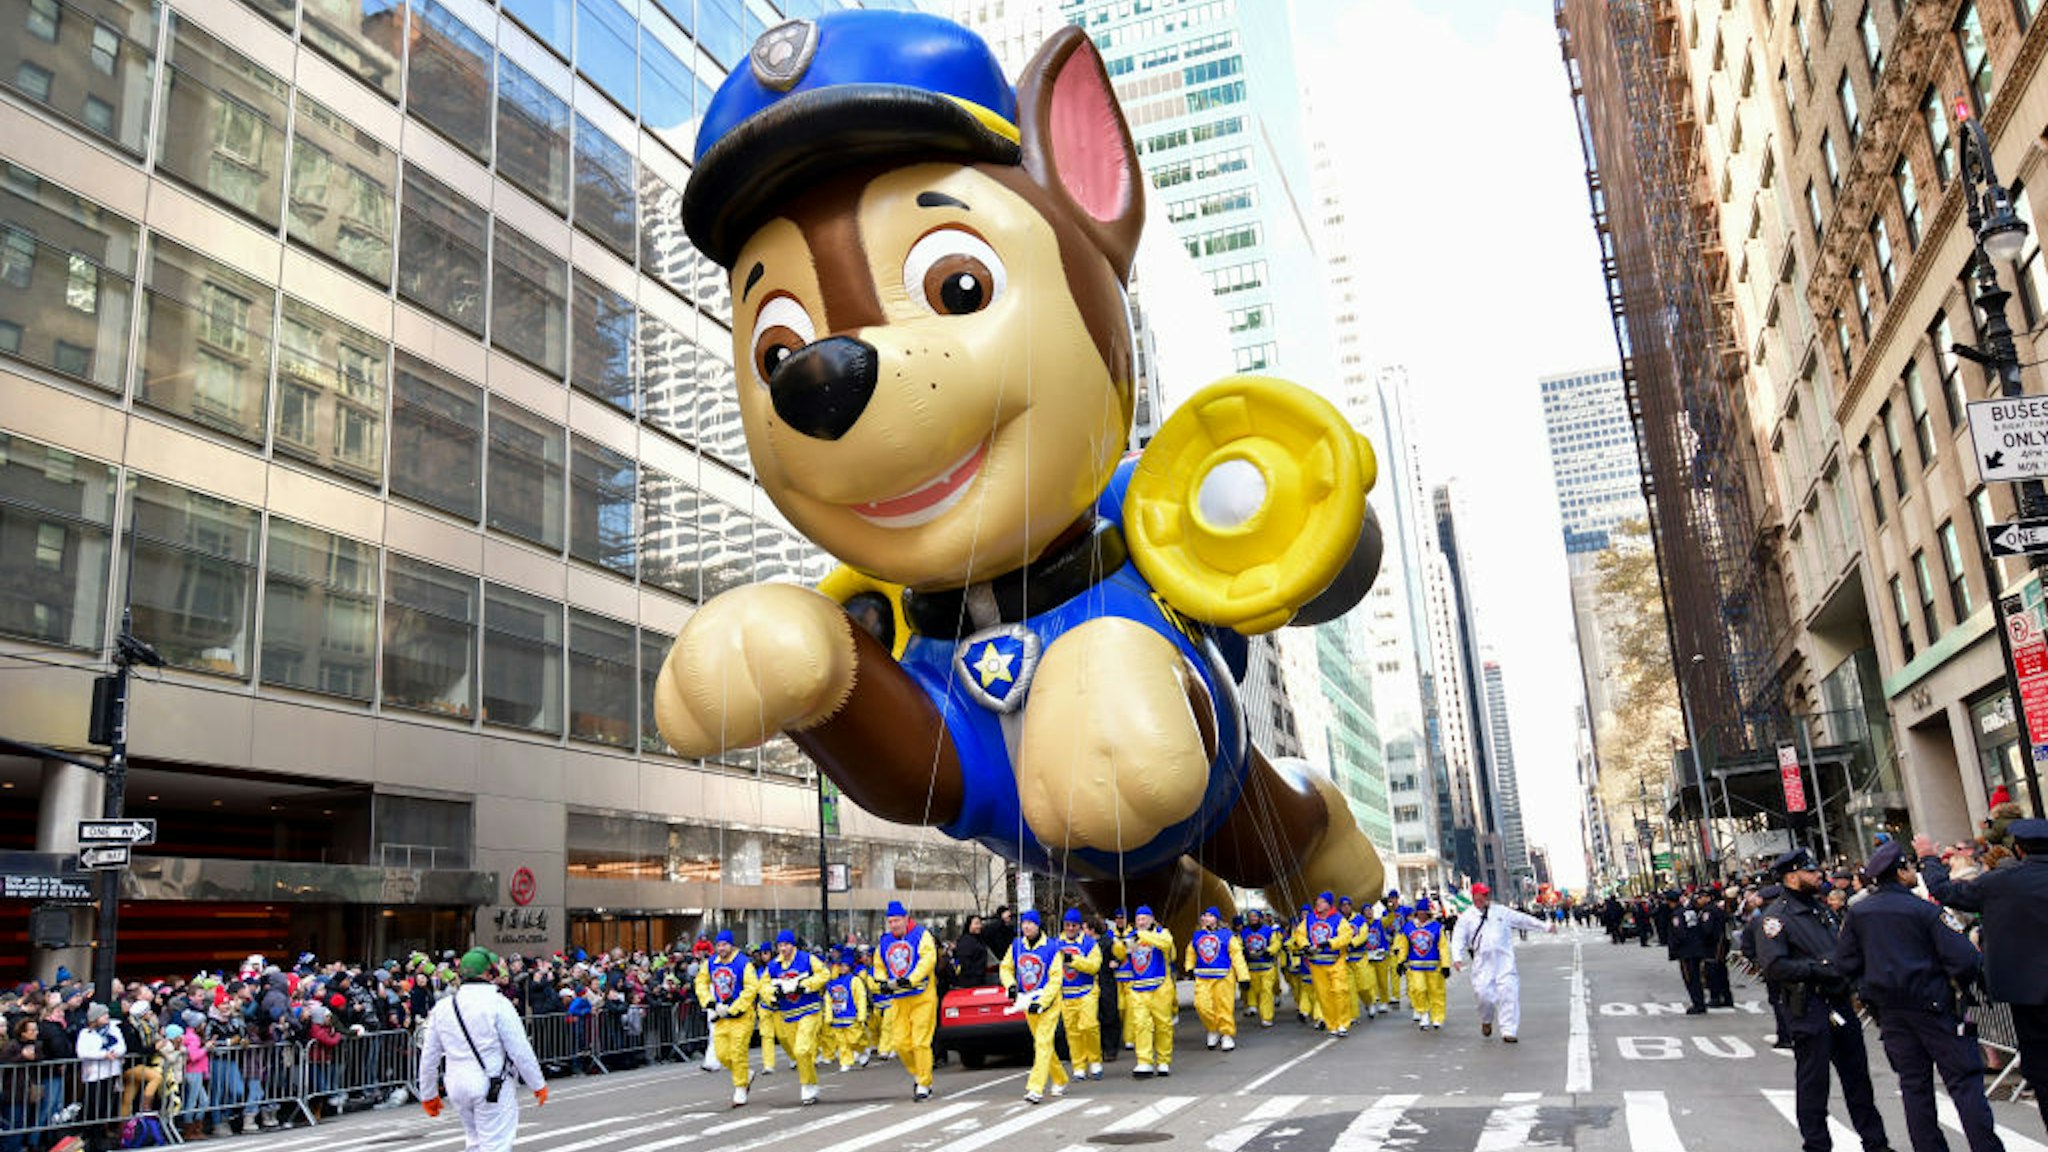 A Chase Paw Patrol balloon seen at the 93rd Annual Macy's Thanksgiving Day Parade on November 28, 2019 in New York City.